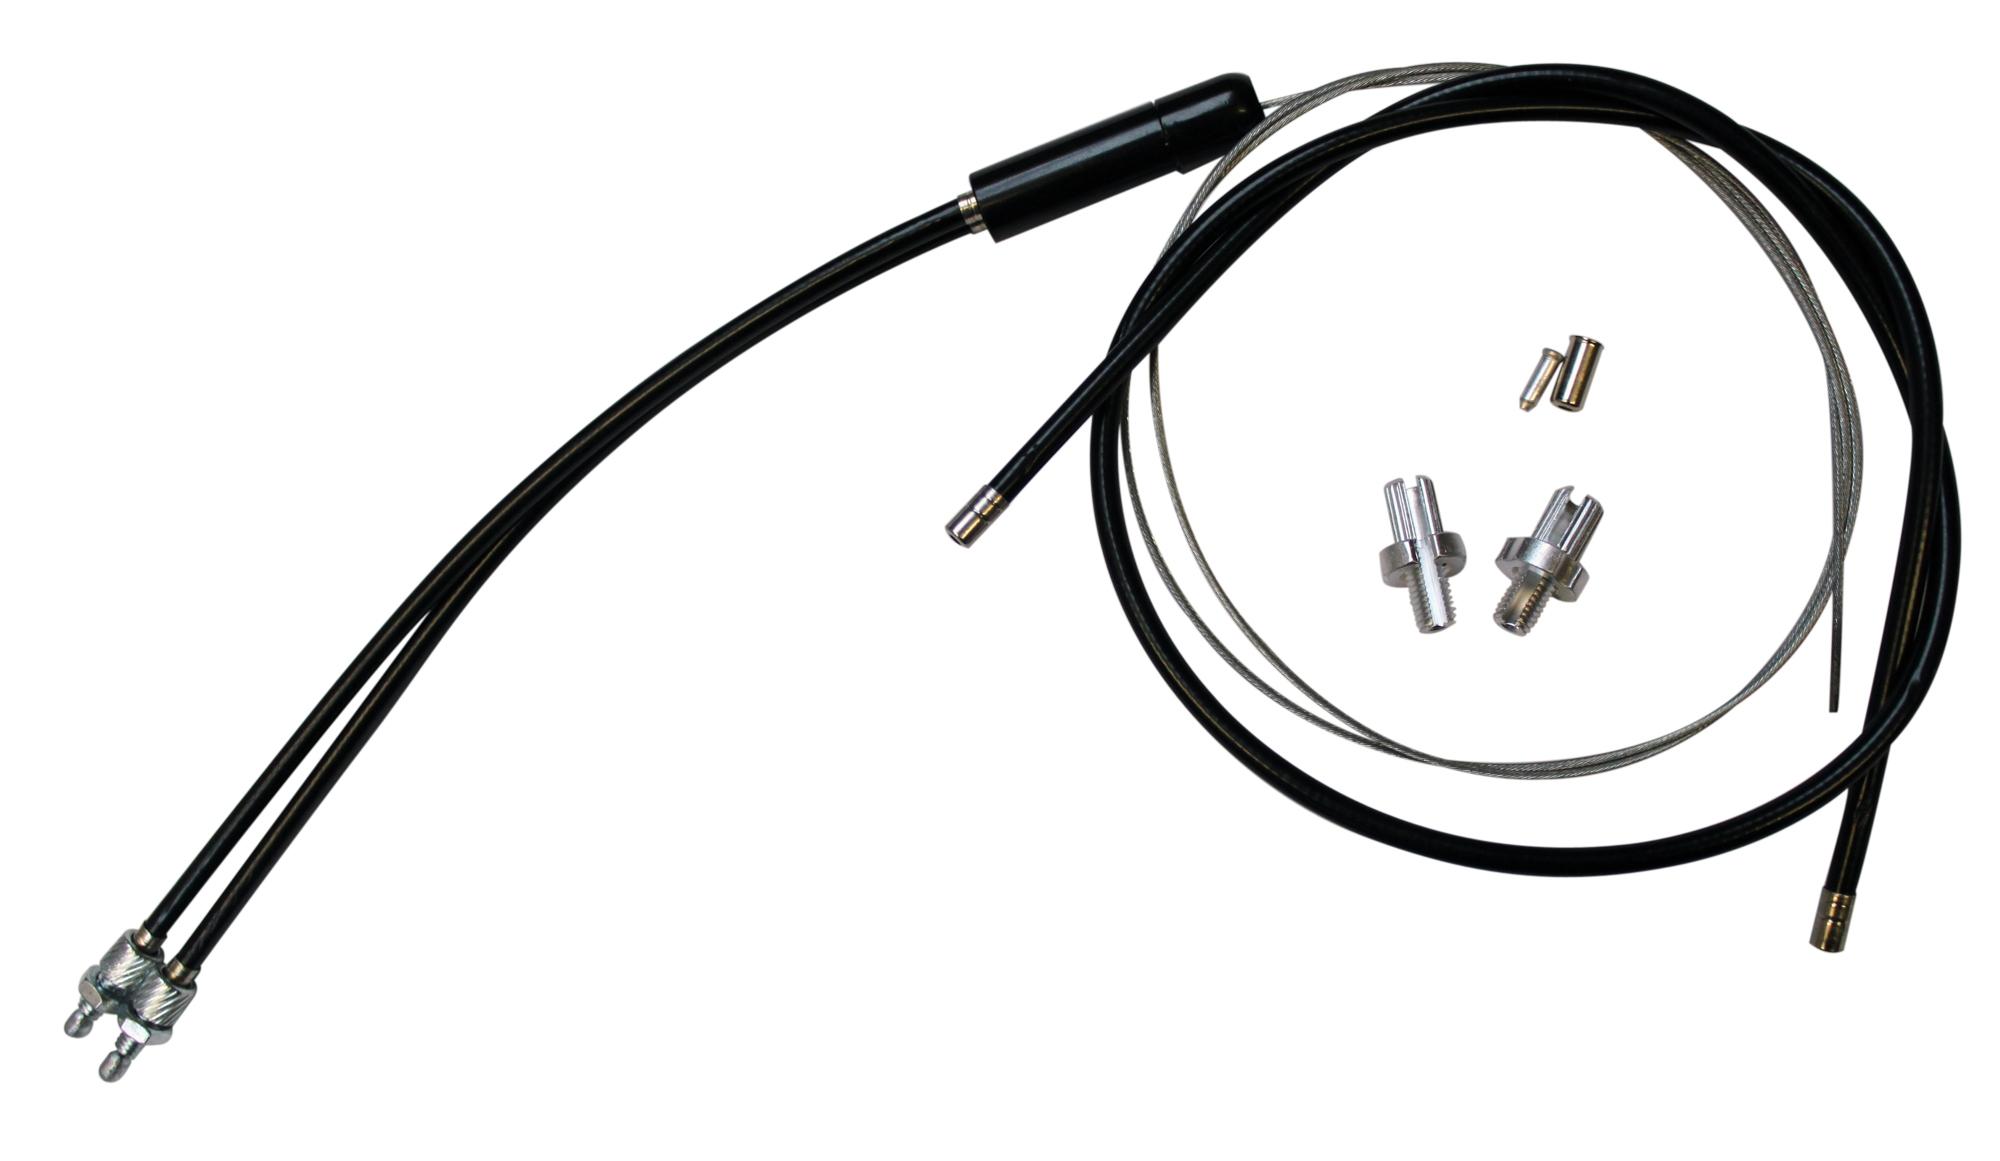 Halfords Clarks Lower Gyro Bike Cable